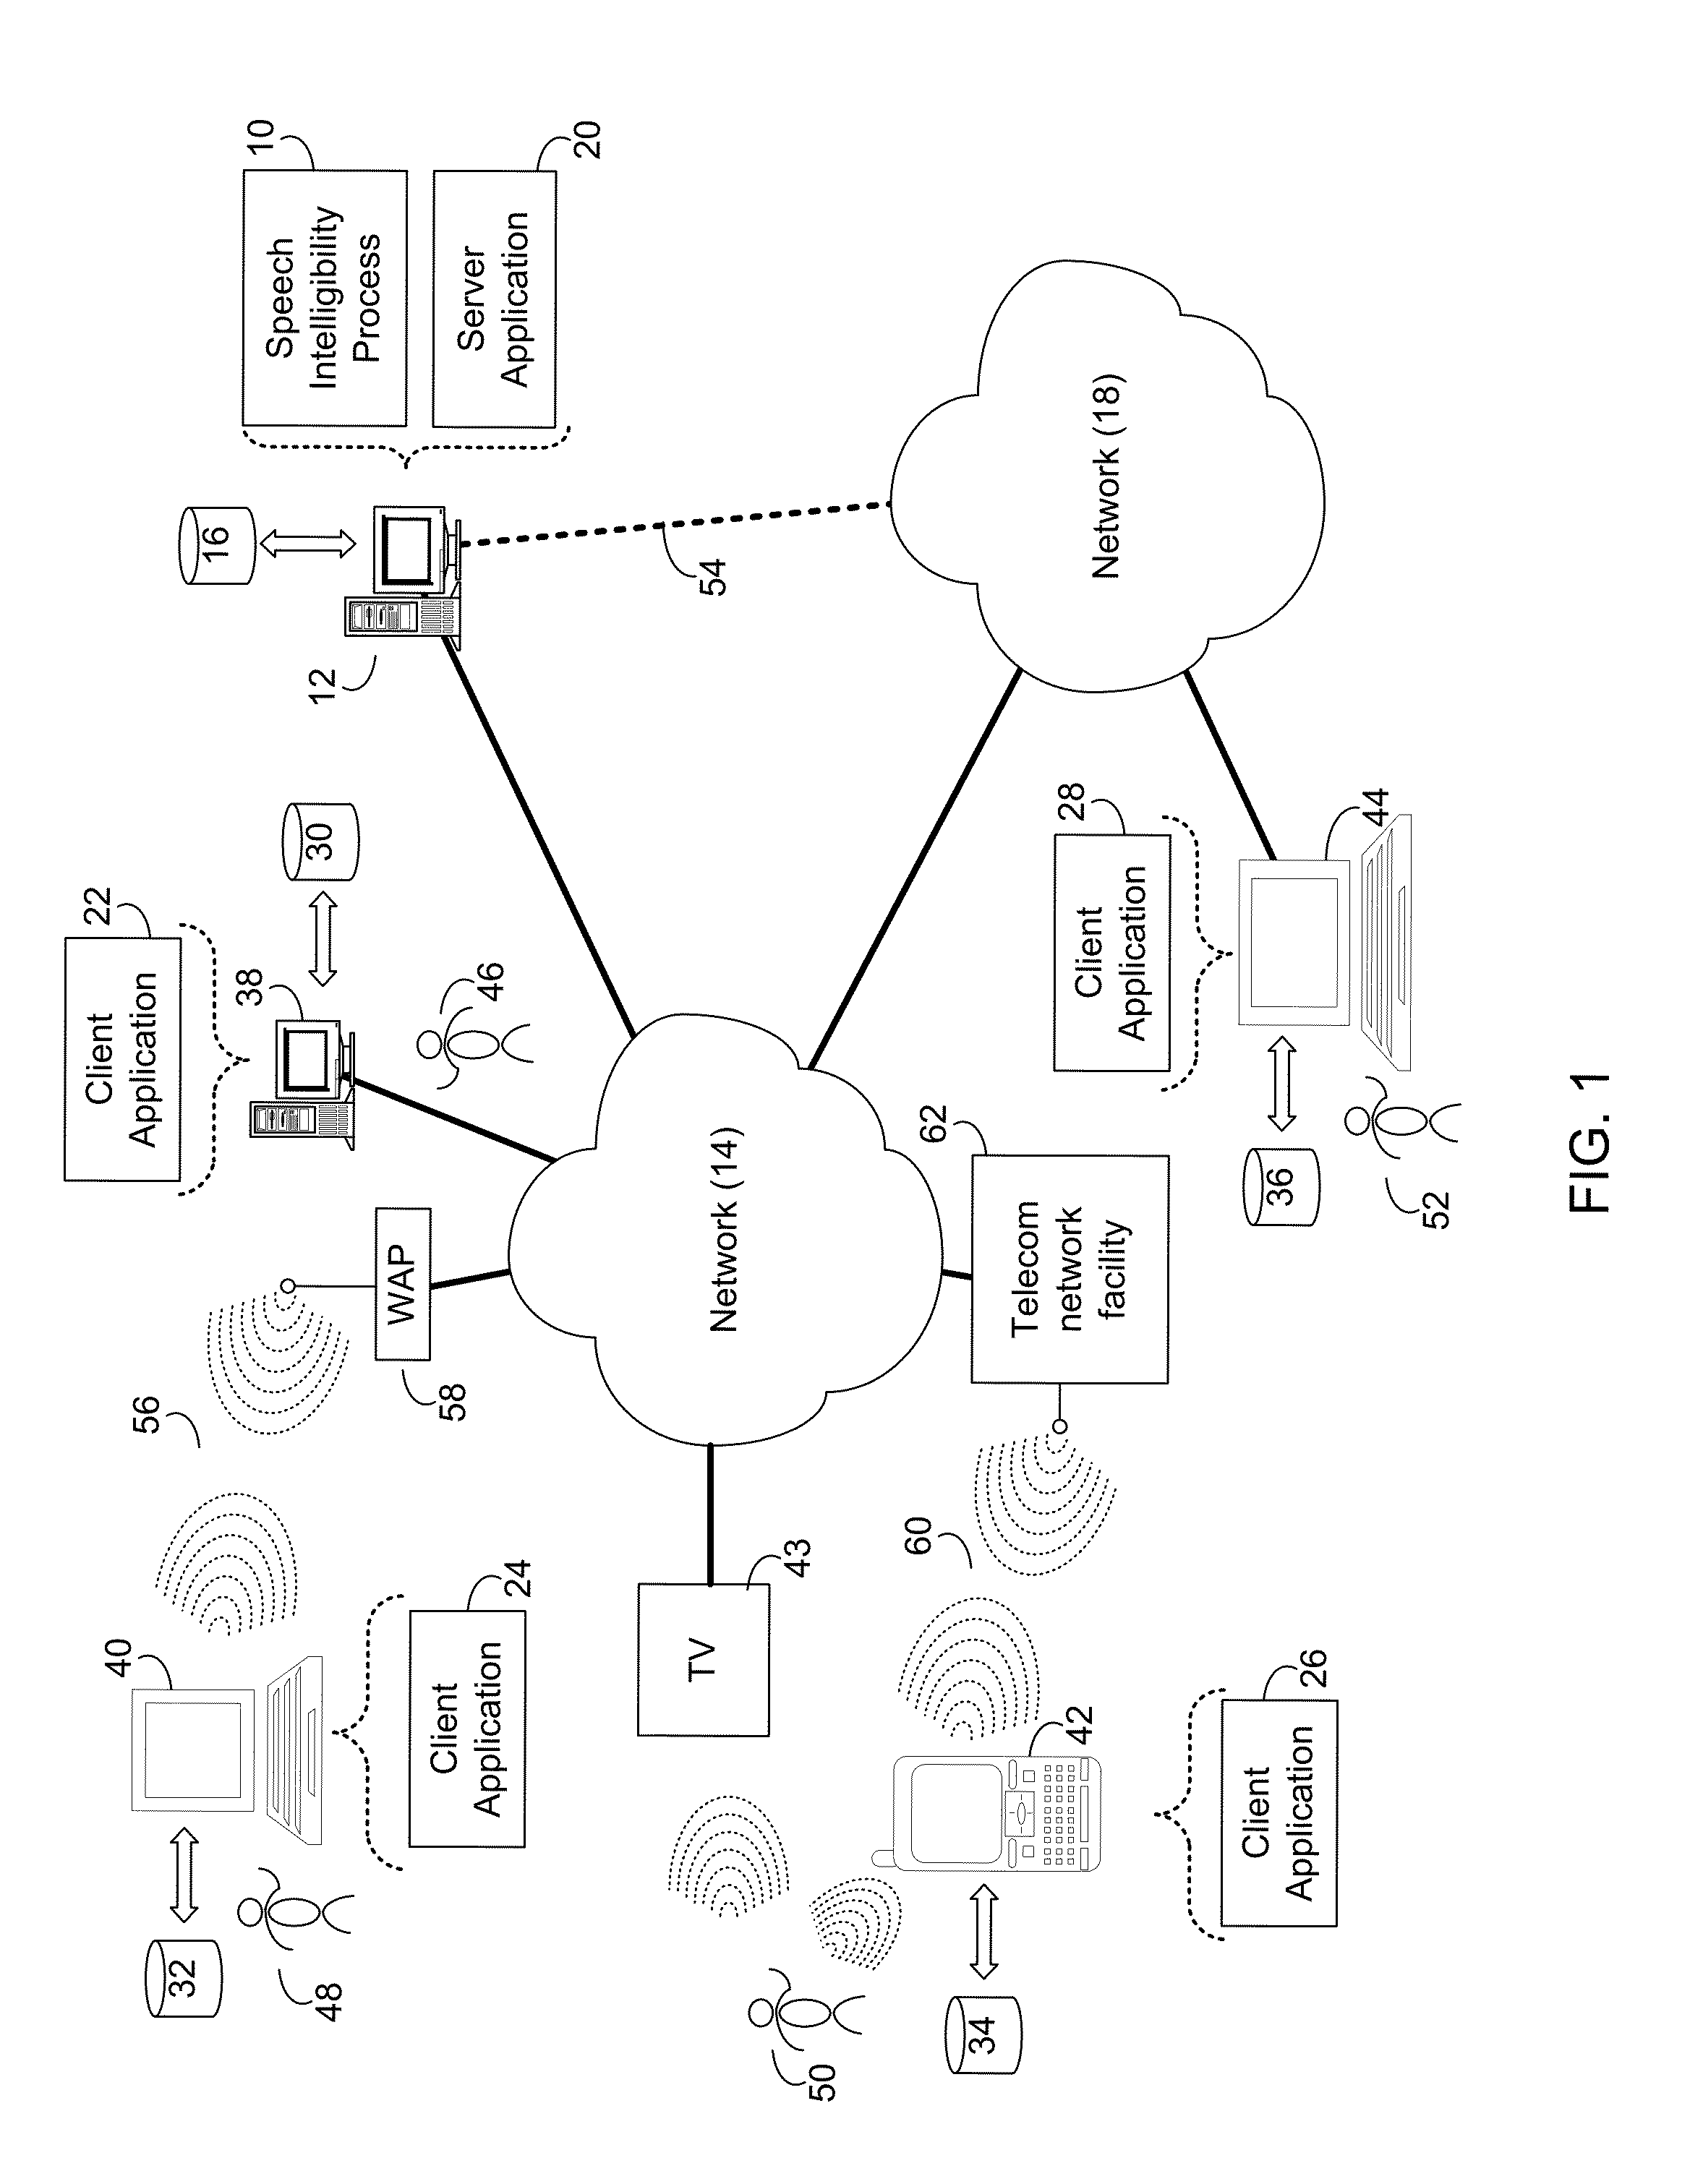 System and method for speech enhancement on compressed speech